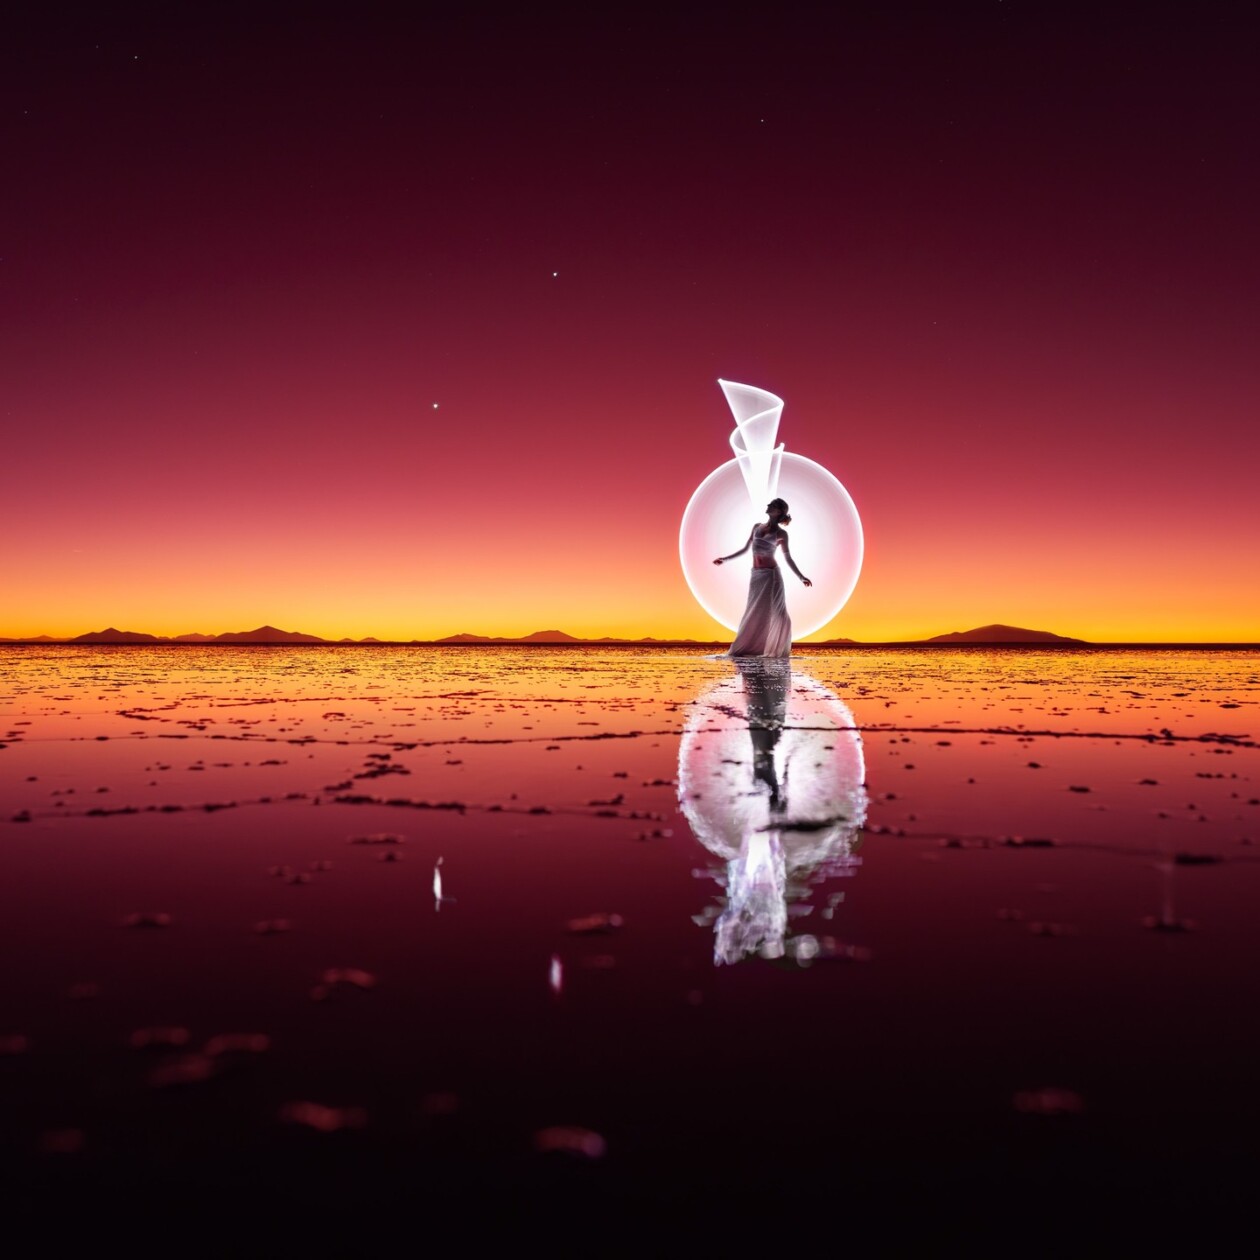 Mesmerizing Light Paintings Set Against A Fiery Red Sky At Bolivias Uyuni Salt Flat By Eric Pare And Kim Henry 1